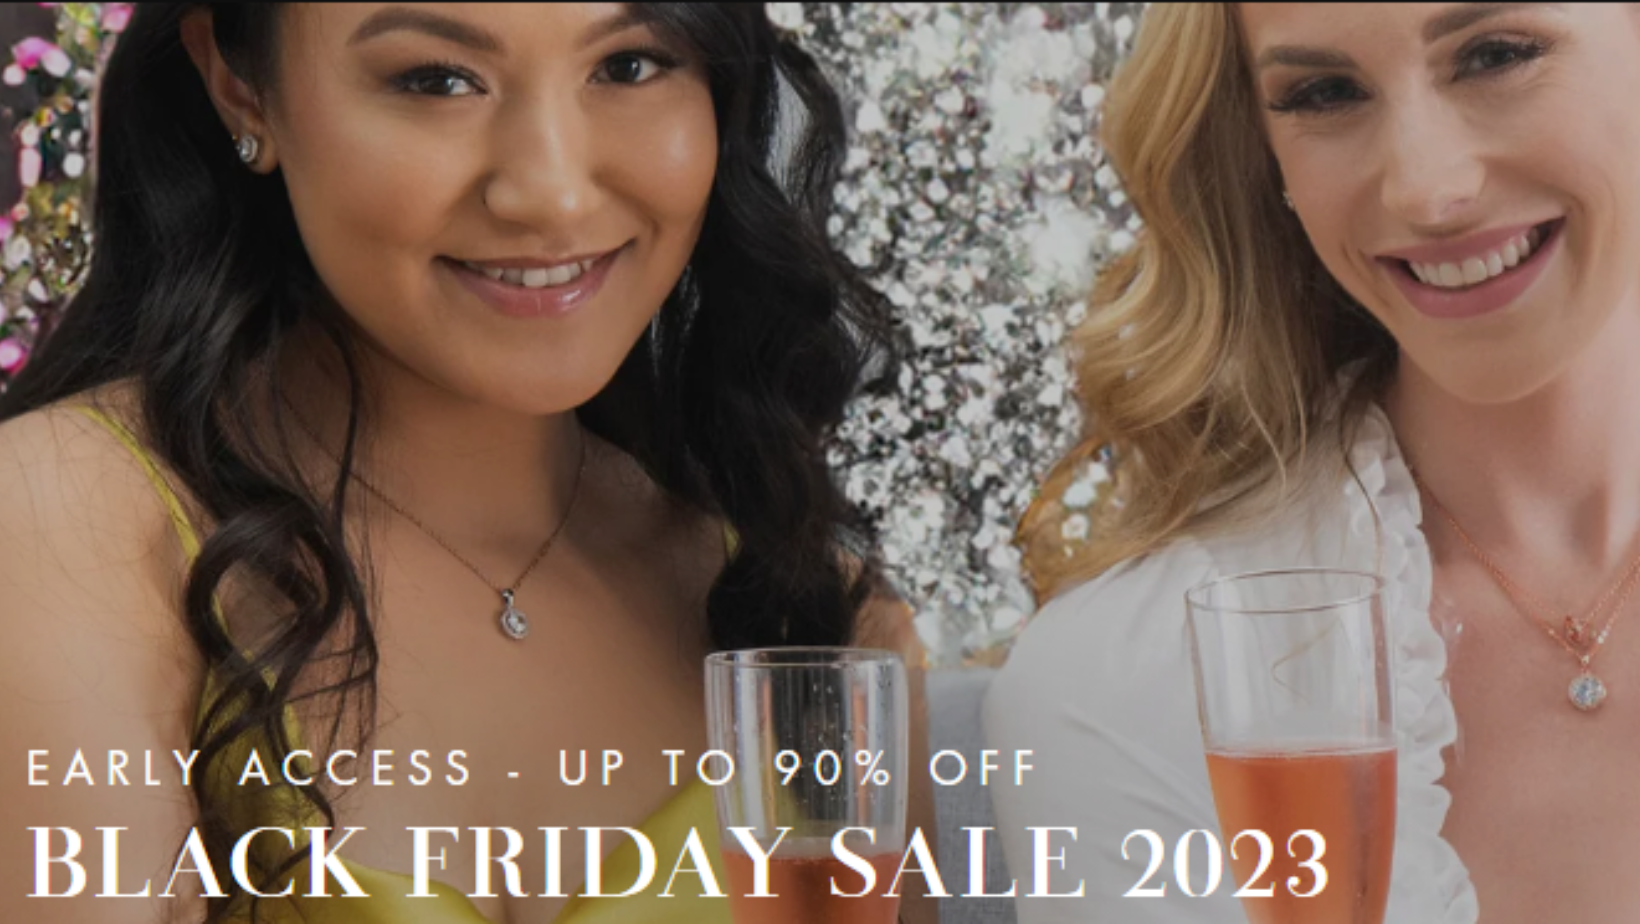 Early Birds Get the Gems: Cate & Chloe's Black Friday 2023 Special